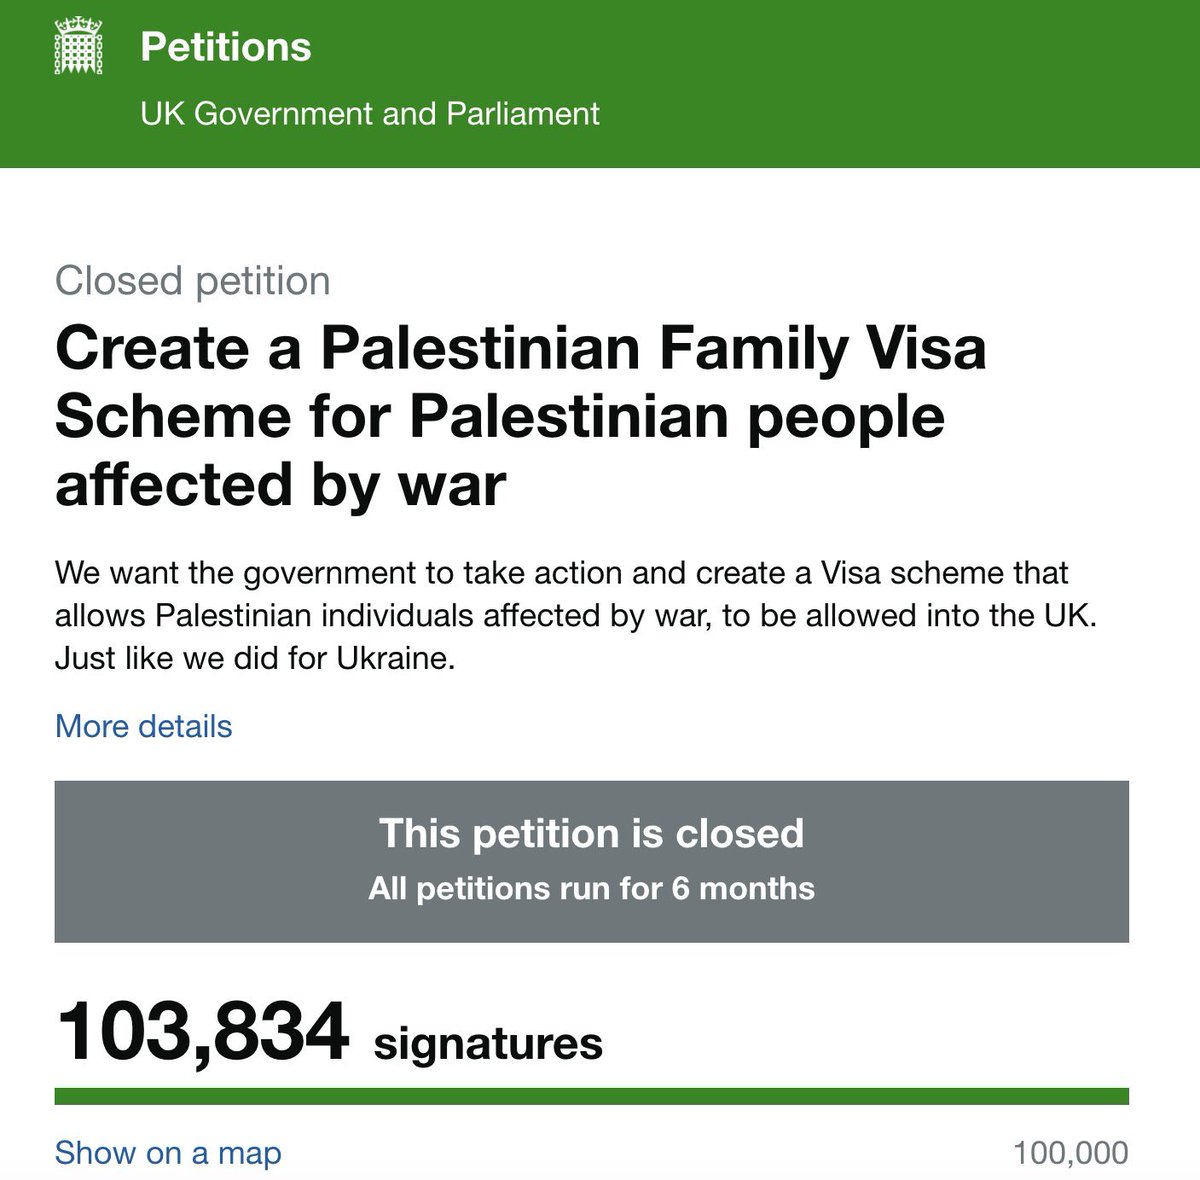 See this.. it’s very real. It may well be defeated under the Tories but it will absolutely go through with a Labour government. The UK would be opening the gates to Palestinians when their own neighbours in the region refuse to accommodate them.